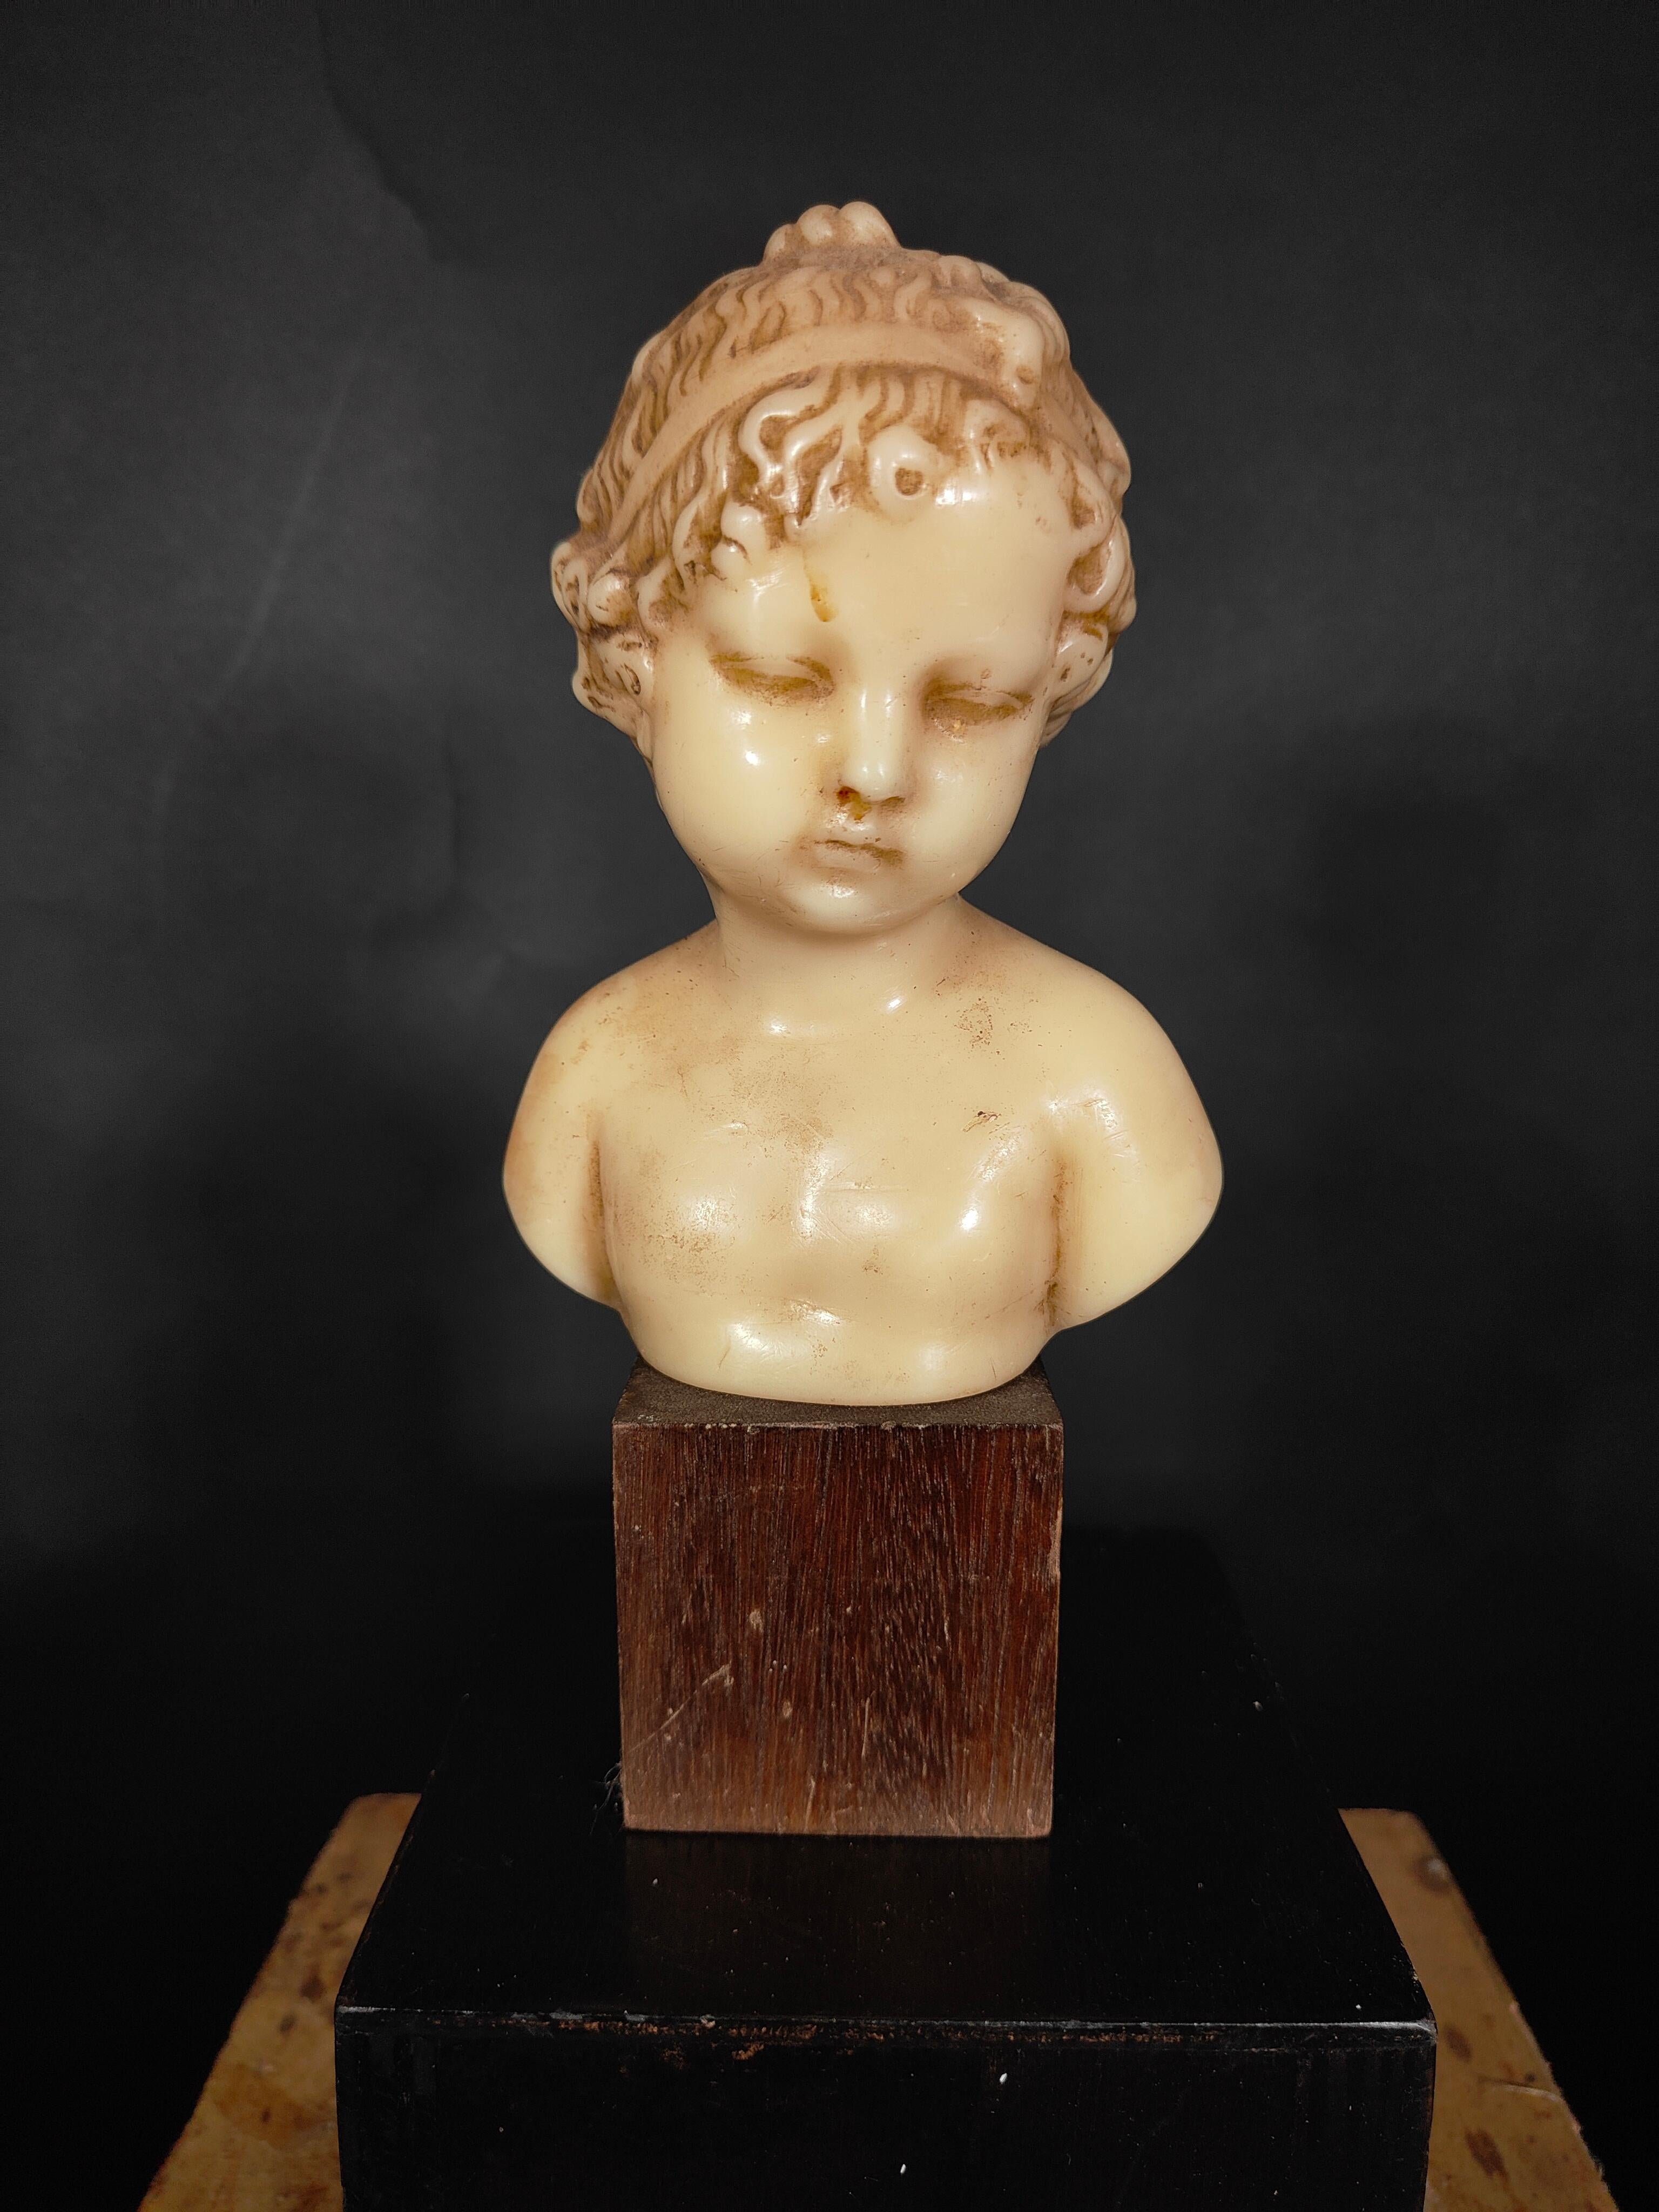 XIX Century child wax bust.
Curious bust in wax representing a child of the xix century on wooden base total measurements: 22 cm height only the bust 16 cm.